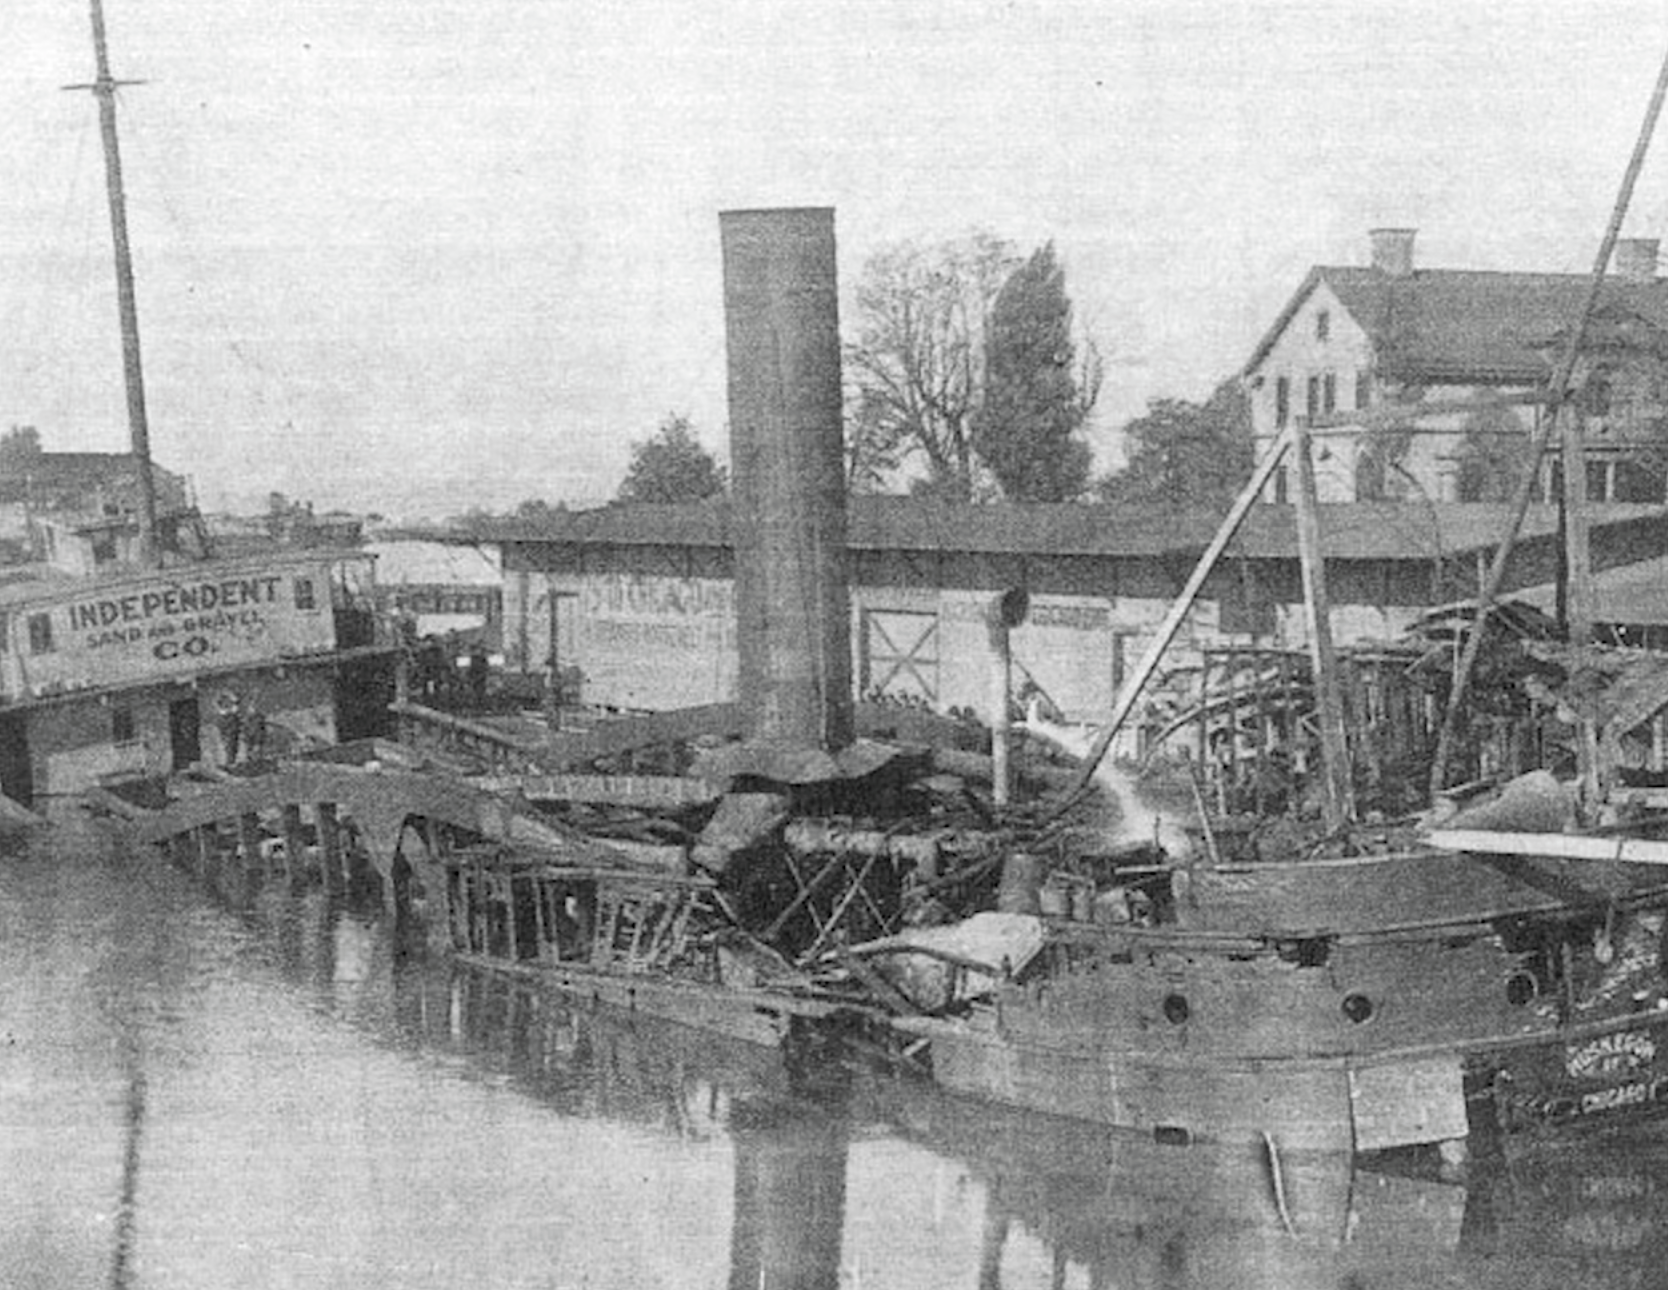 NW Indiana shipwreck receives preservation status